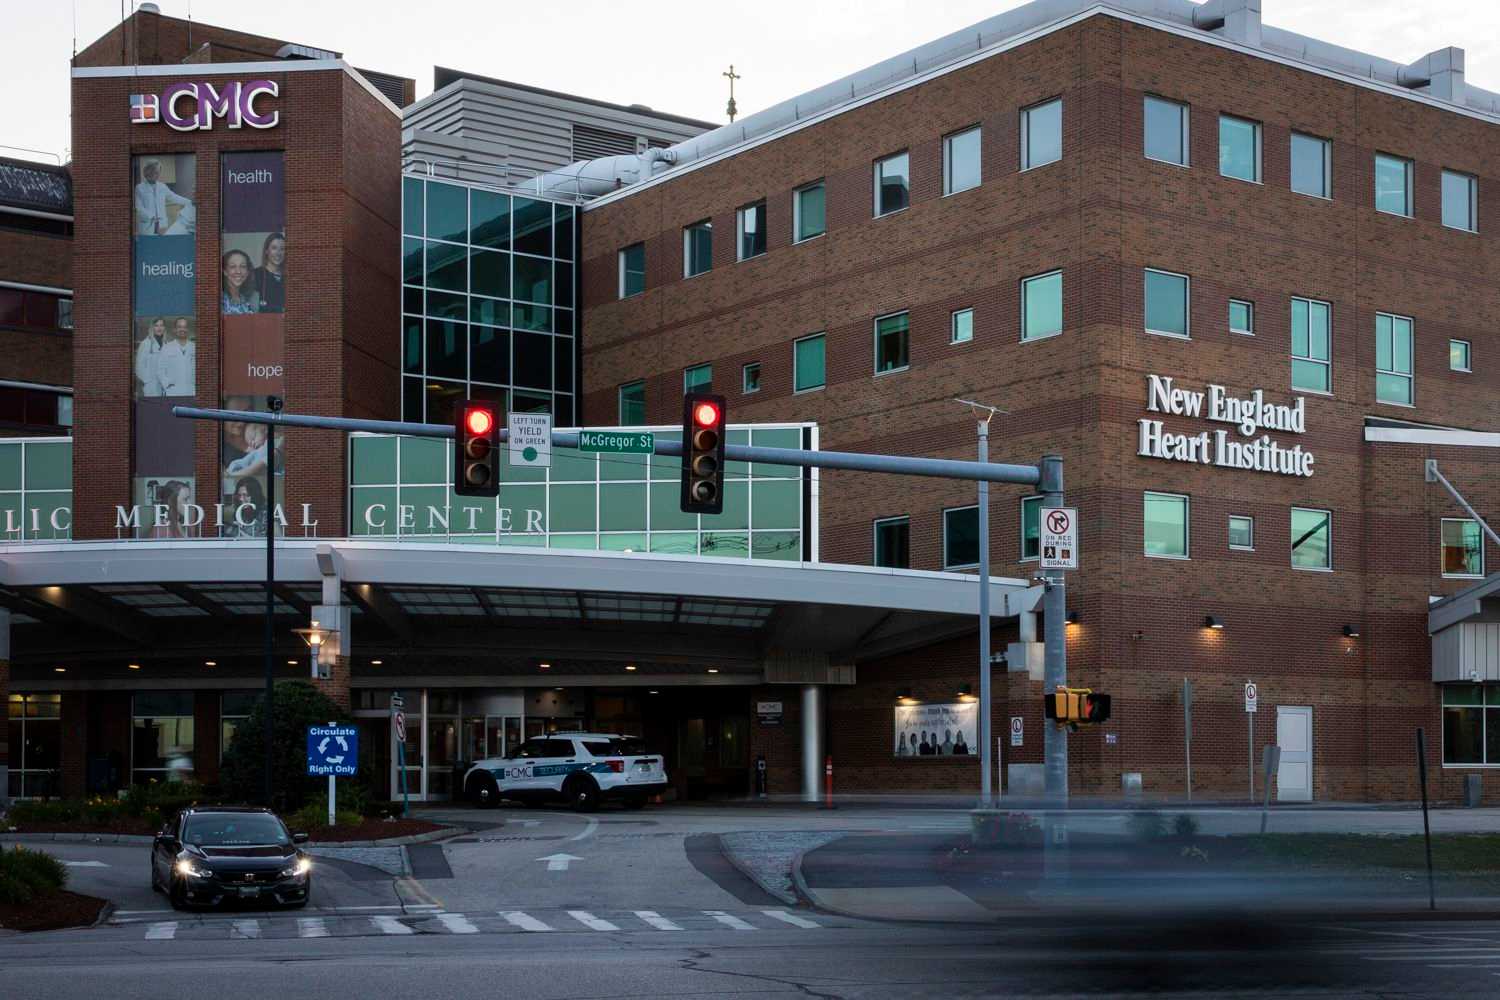 Catholic Medical Center in Manchester, NH.

